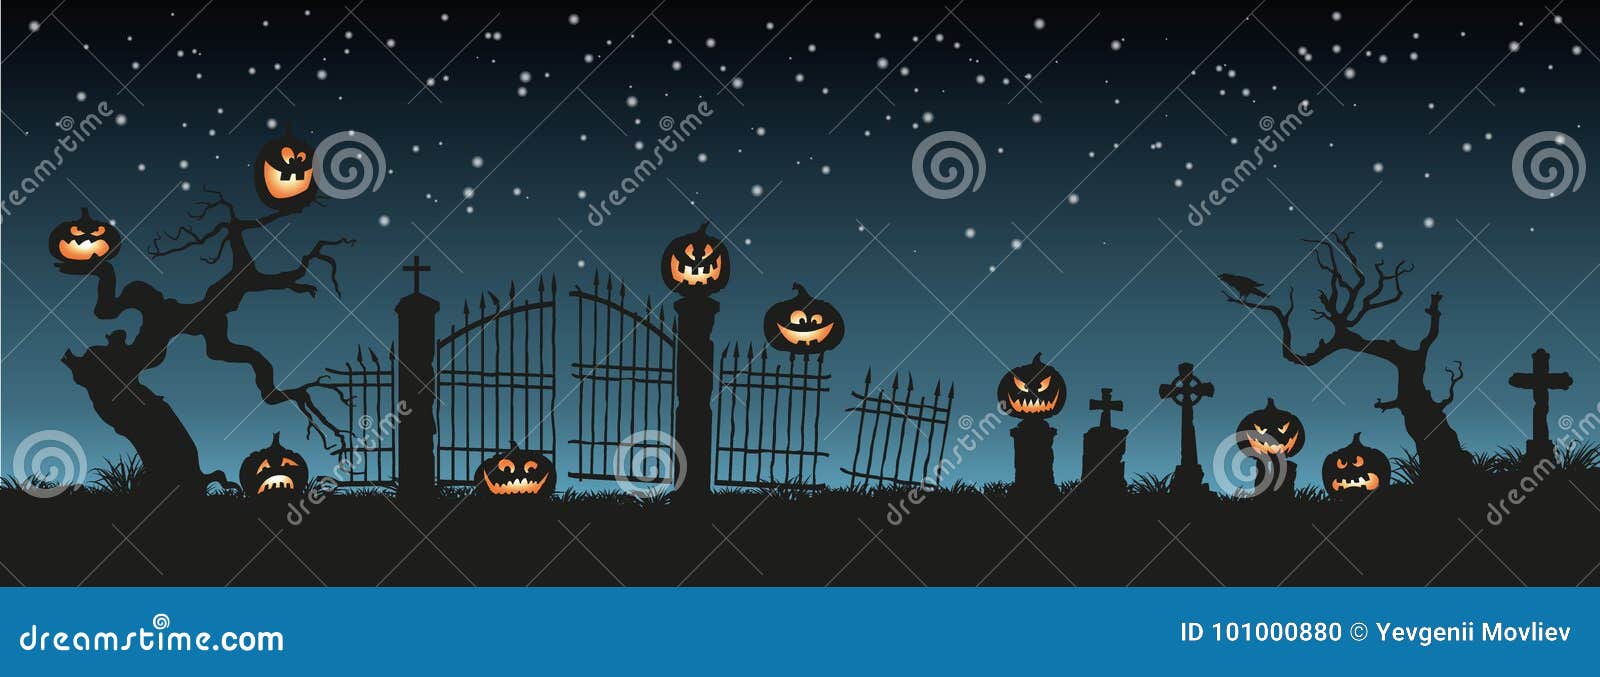 holiday halloween. black silhouettes of pumpkins on the cemetery on night sky background. graveyard and broken trees